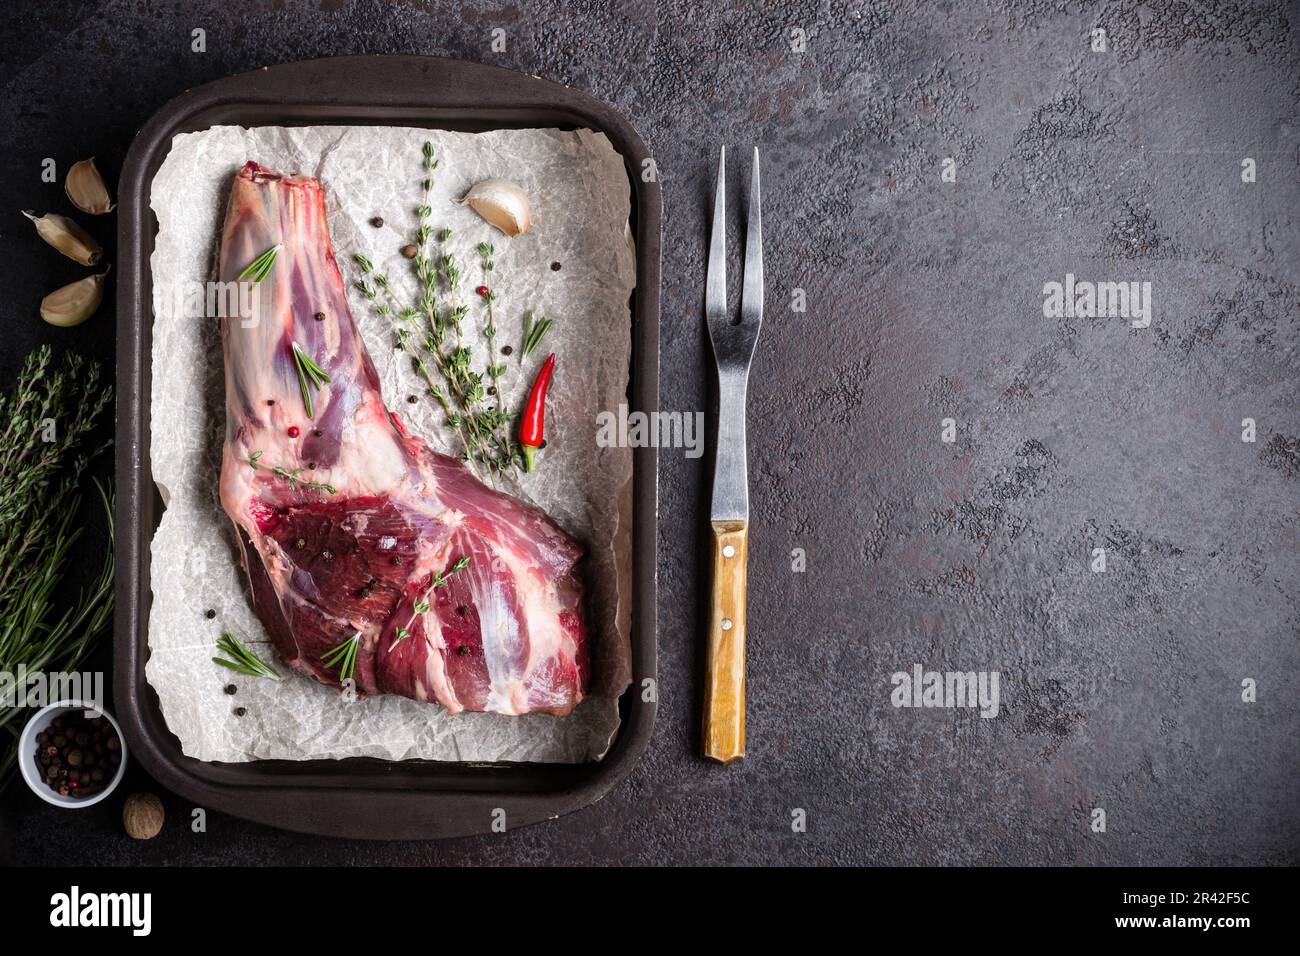 Raw fresh Lamb Meat shank, herbs and fork on black stone background Stock Photo